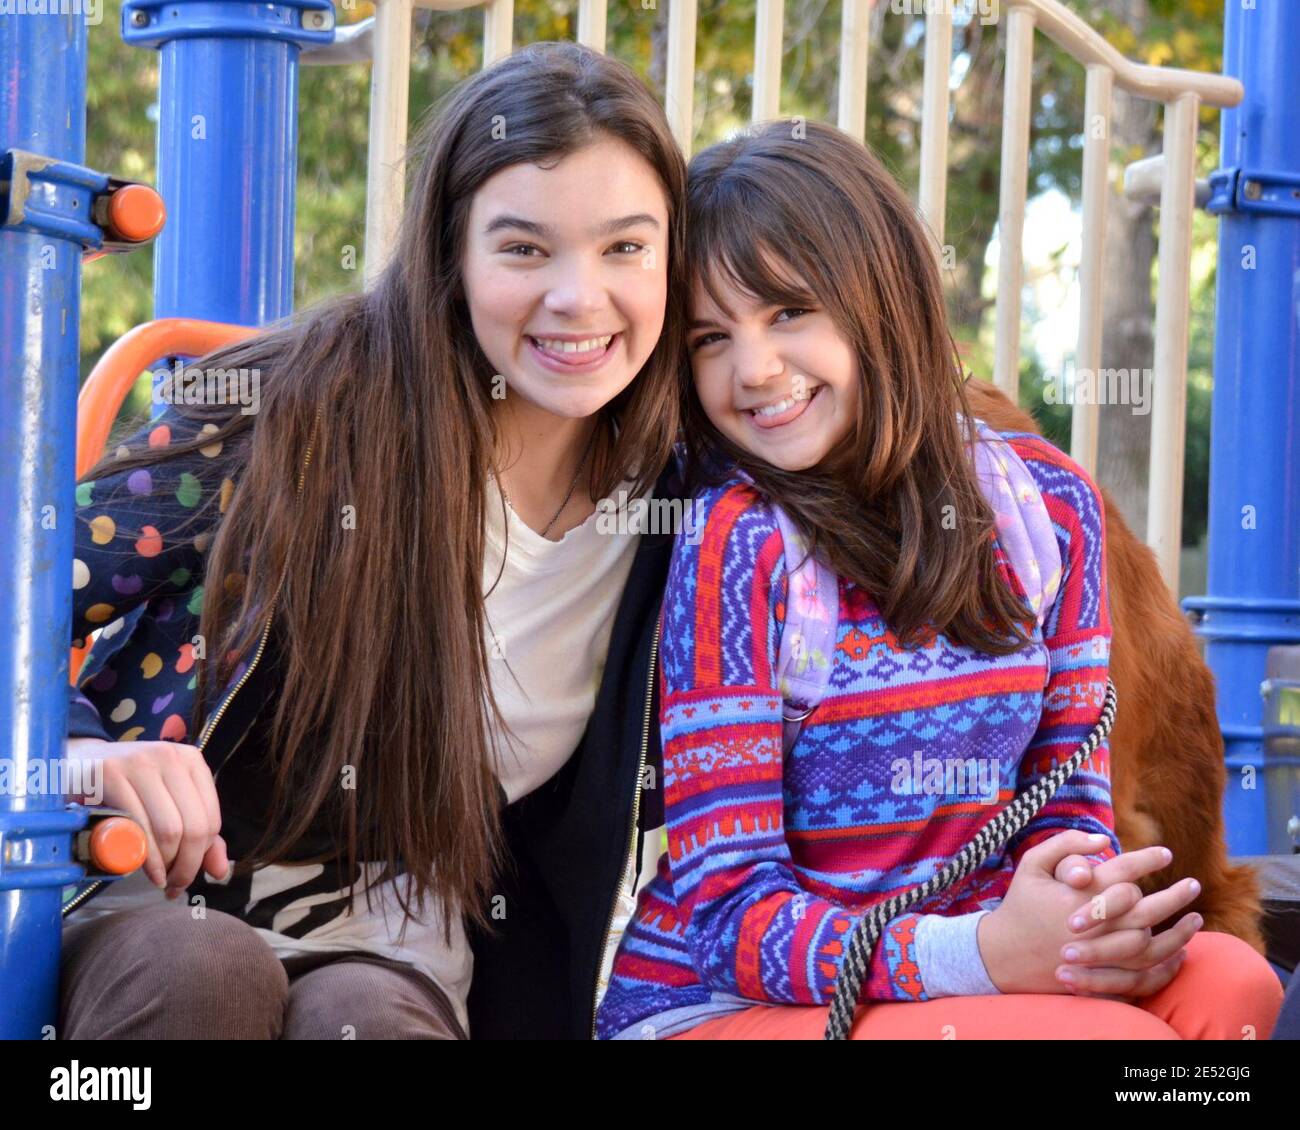 December 10, 2012, Los Angeles, California, USA: Hailee Steinfeld and  Bailee Madison on location for Make a Film Foundation ''The Magic Bracelet''  Production Stills featuring Bailee Madison and Hailee Steinfeld. (Credit  Image: ©